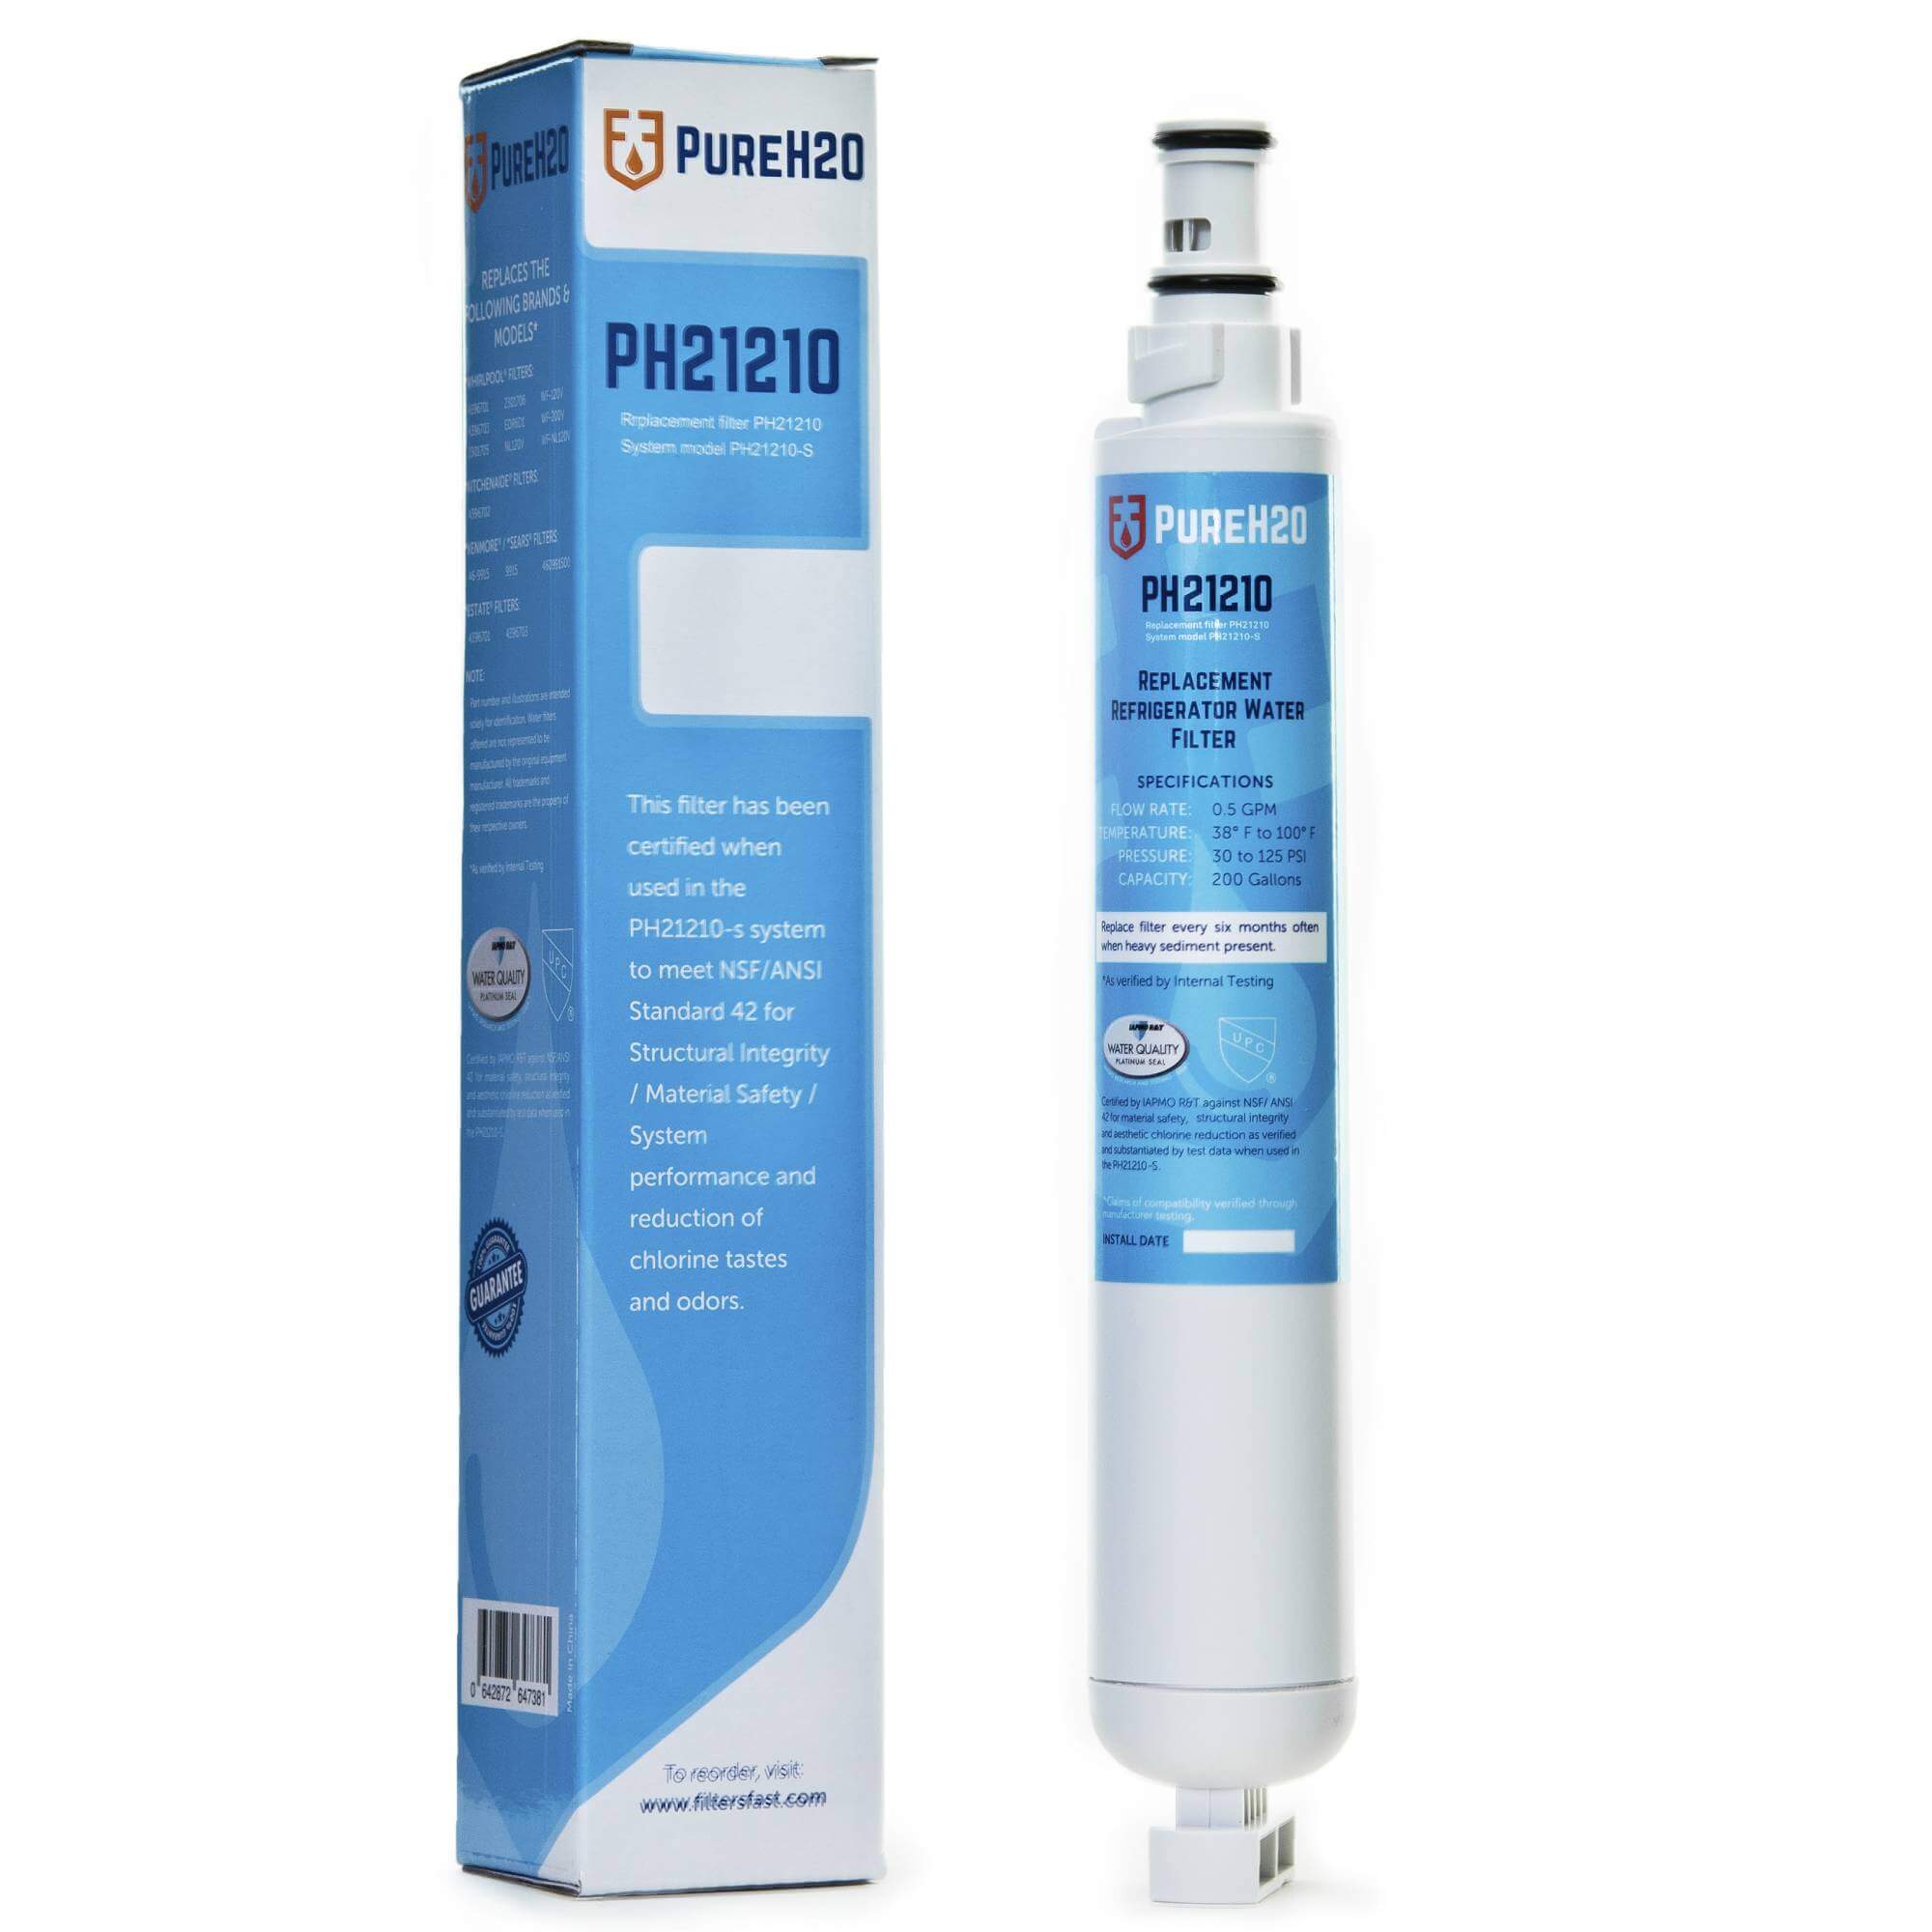 PureH2O PH21210 Replacement for Tier1 RWF1080